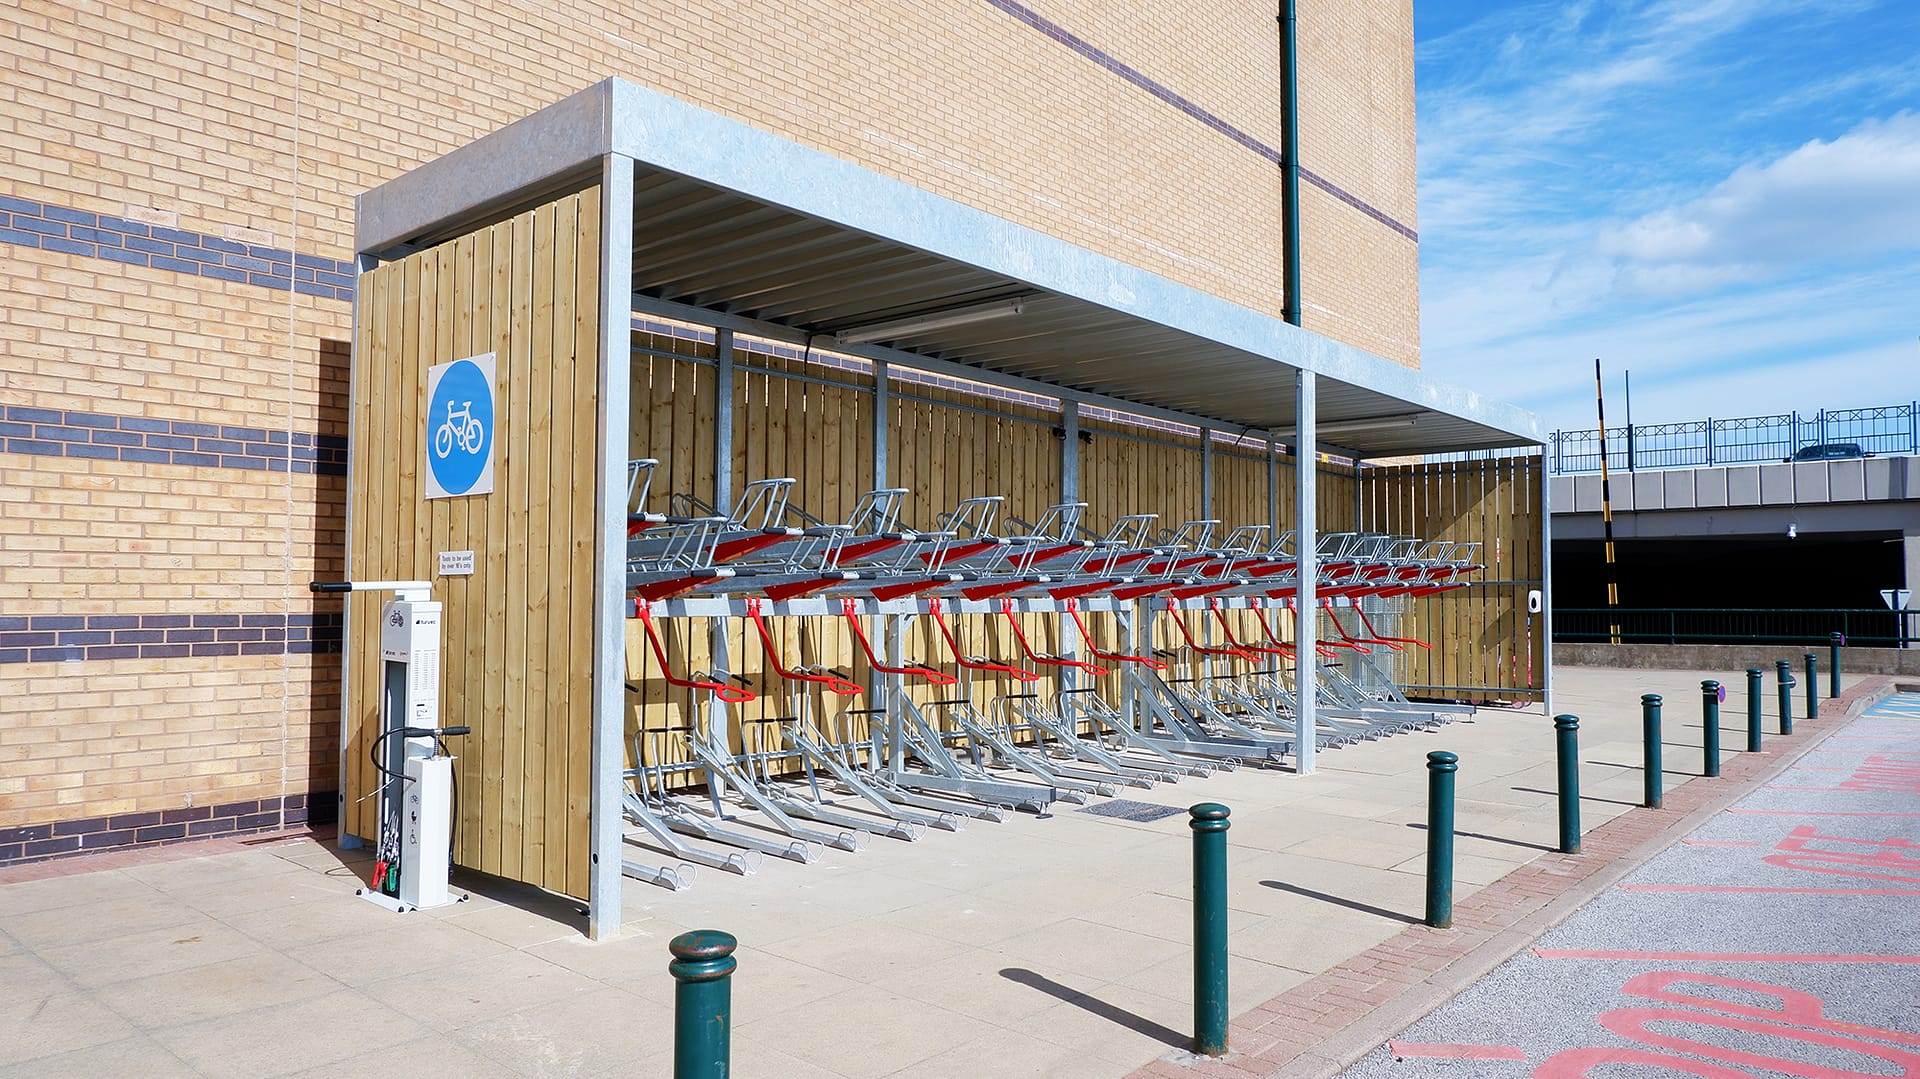 bike racks and shelter meadowhall shopping centre